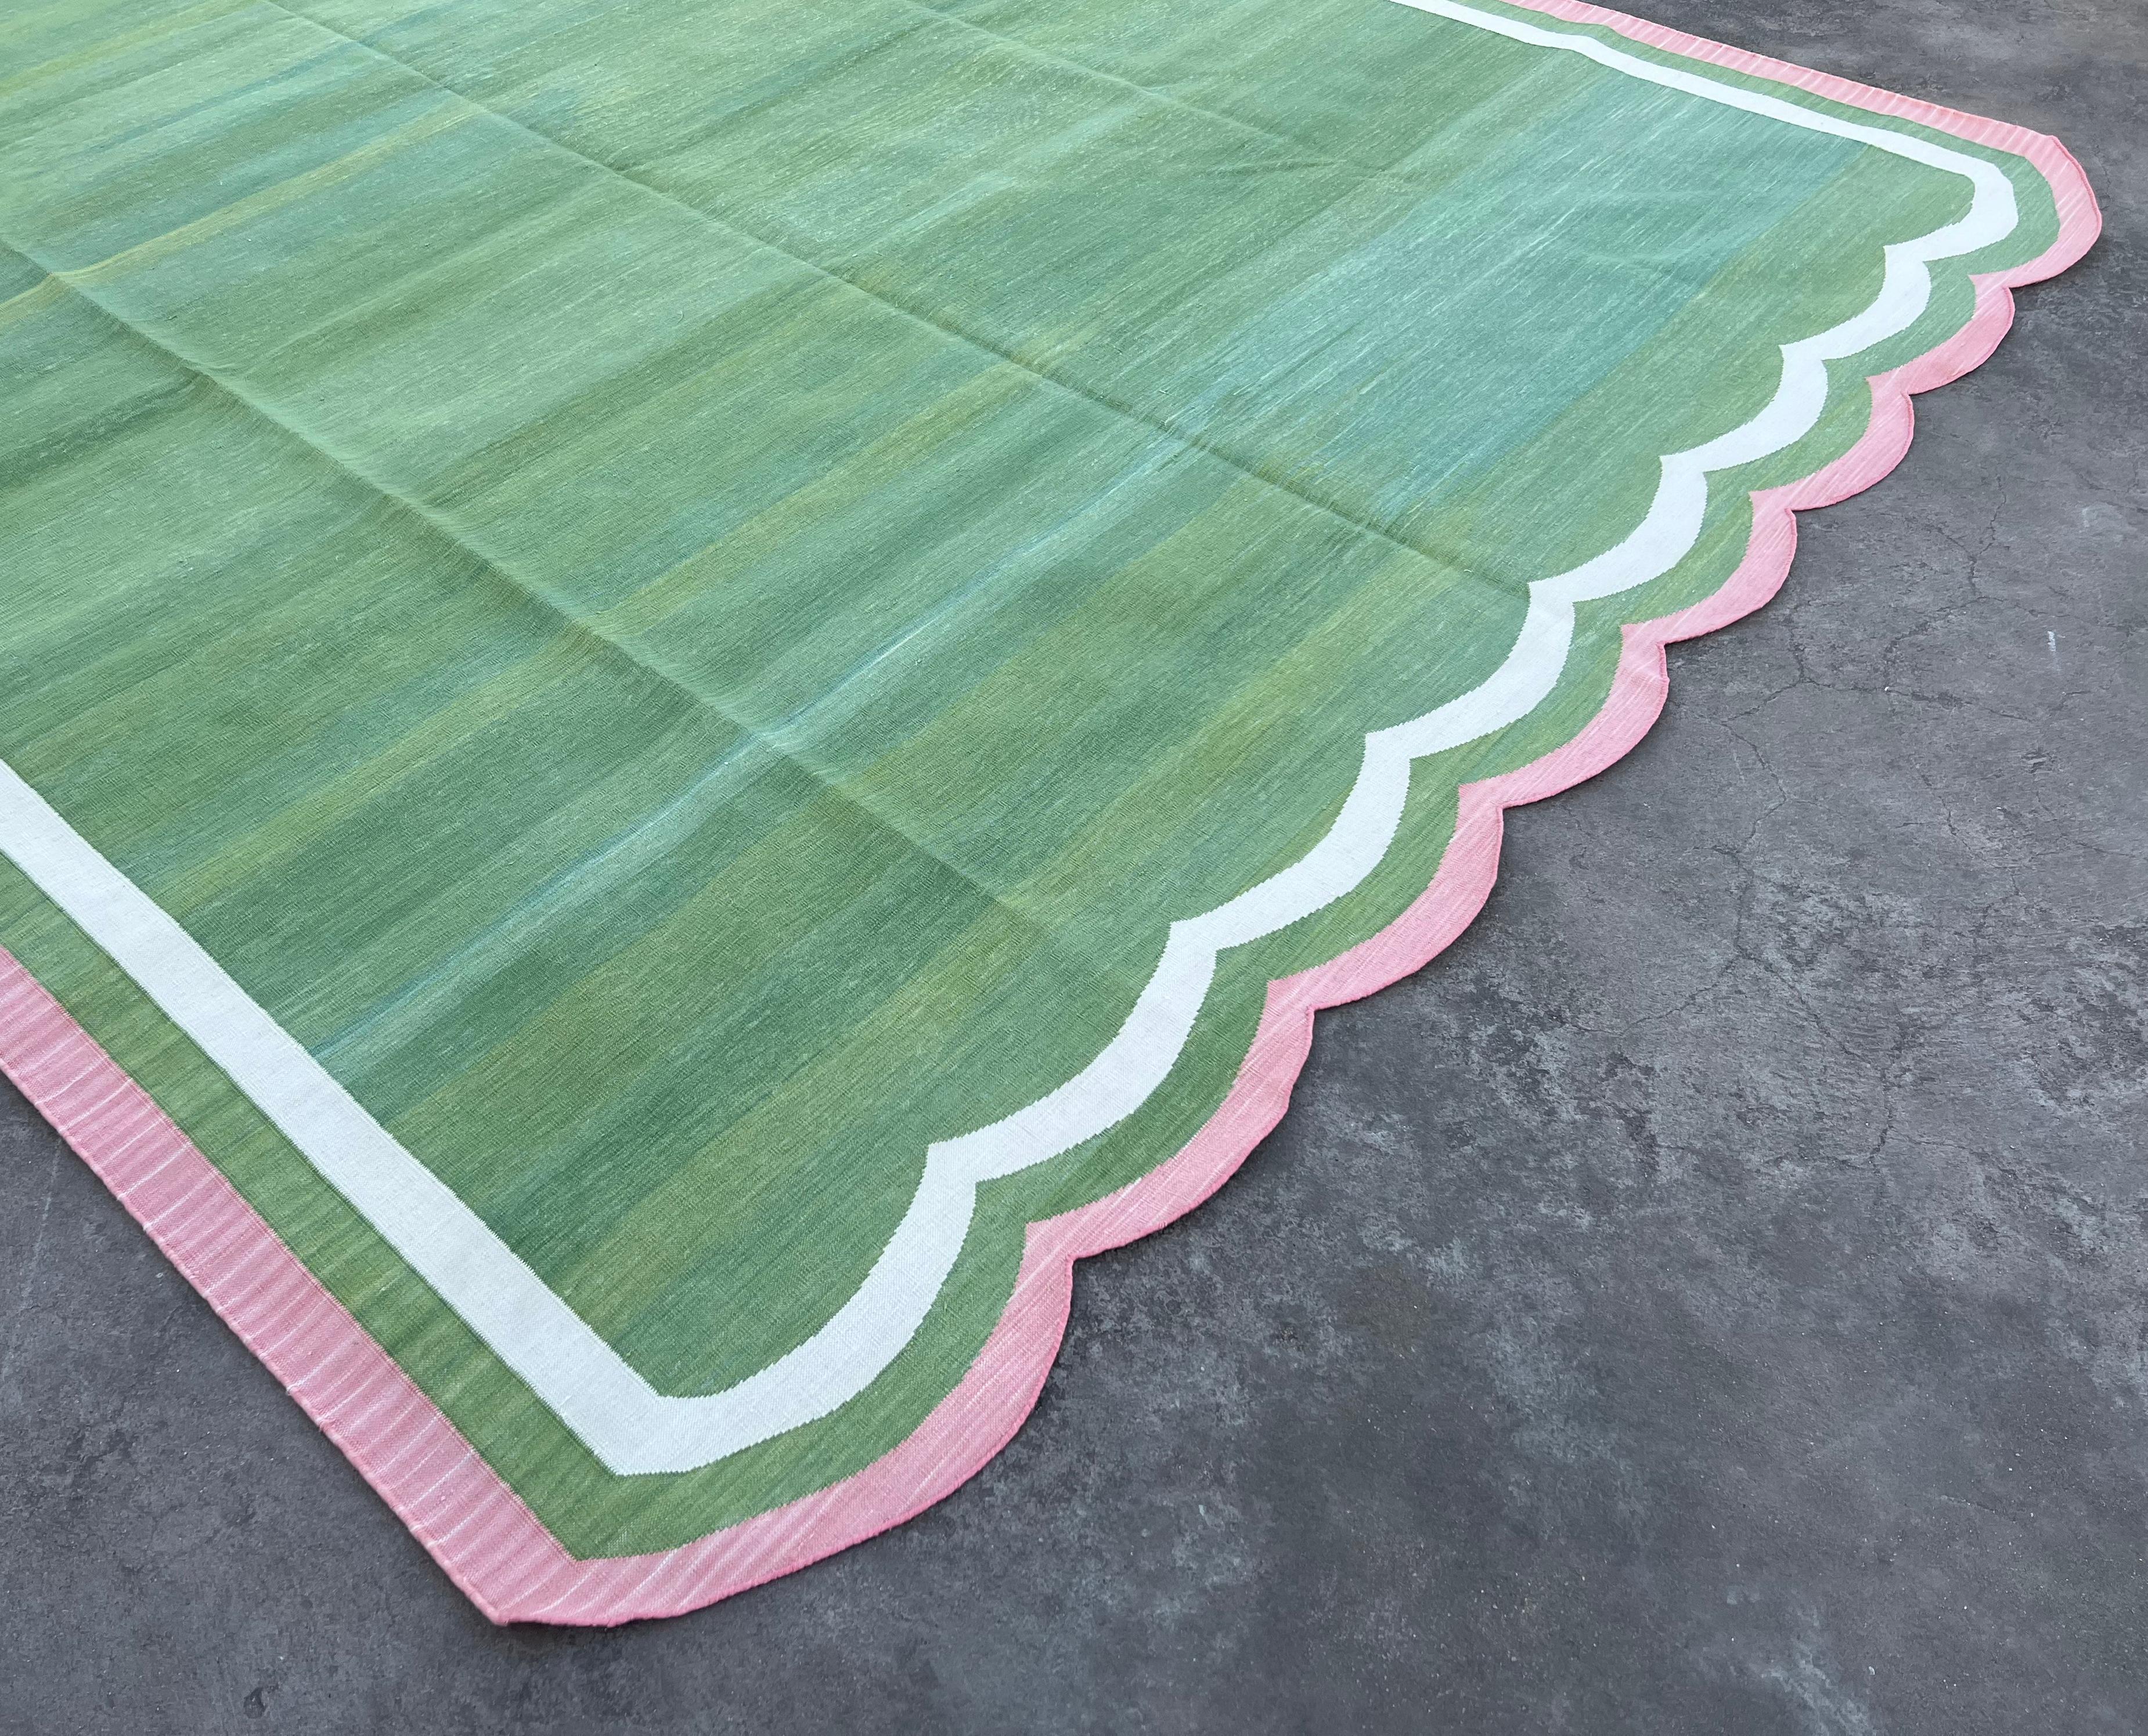 Hand-Woven Handmade Cotton Area Flat Weave Rug, 8x10 Green And Pink Scallop Striped Dhurrie For Sale